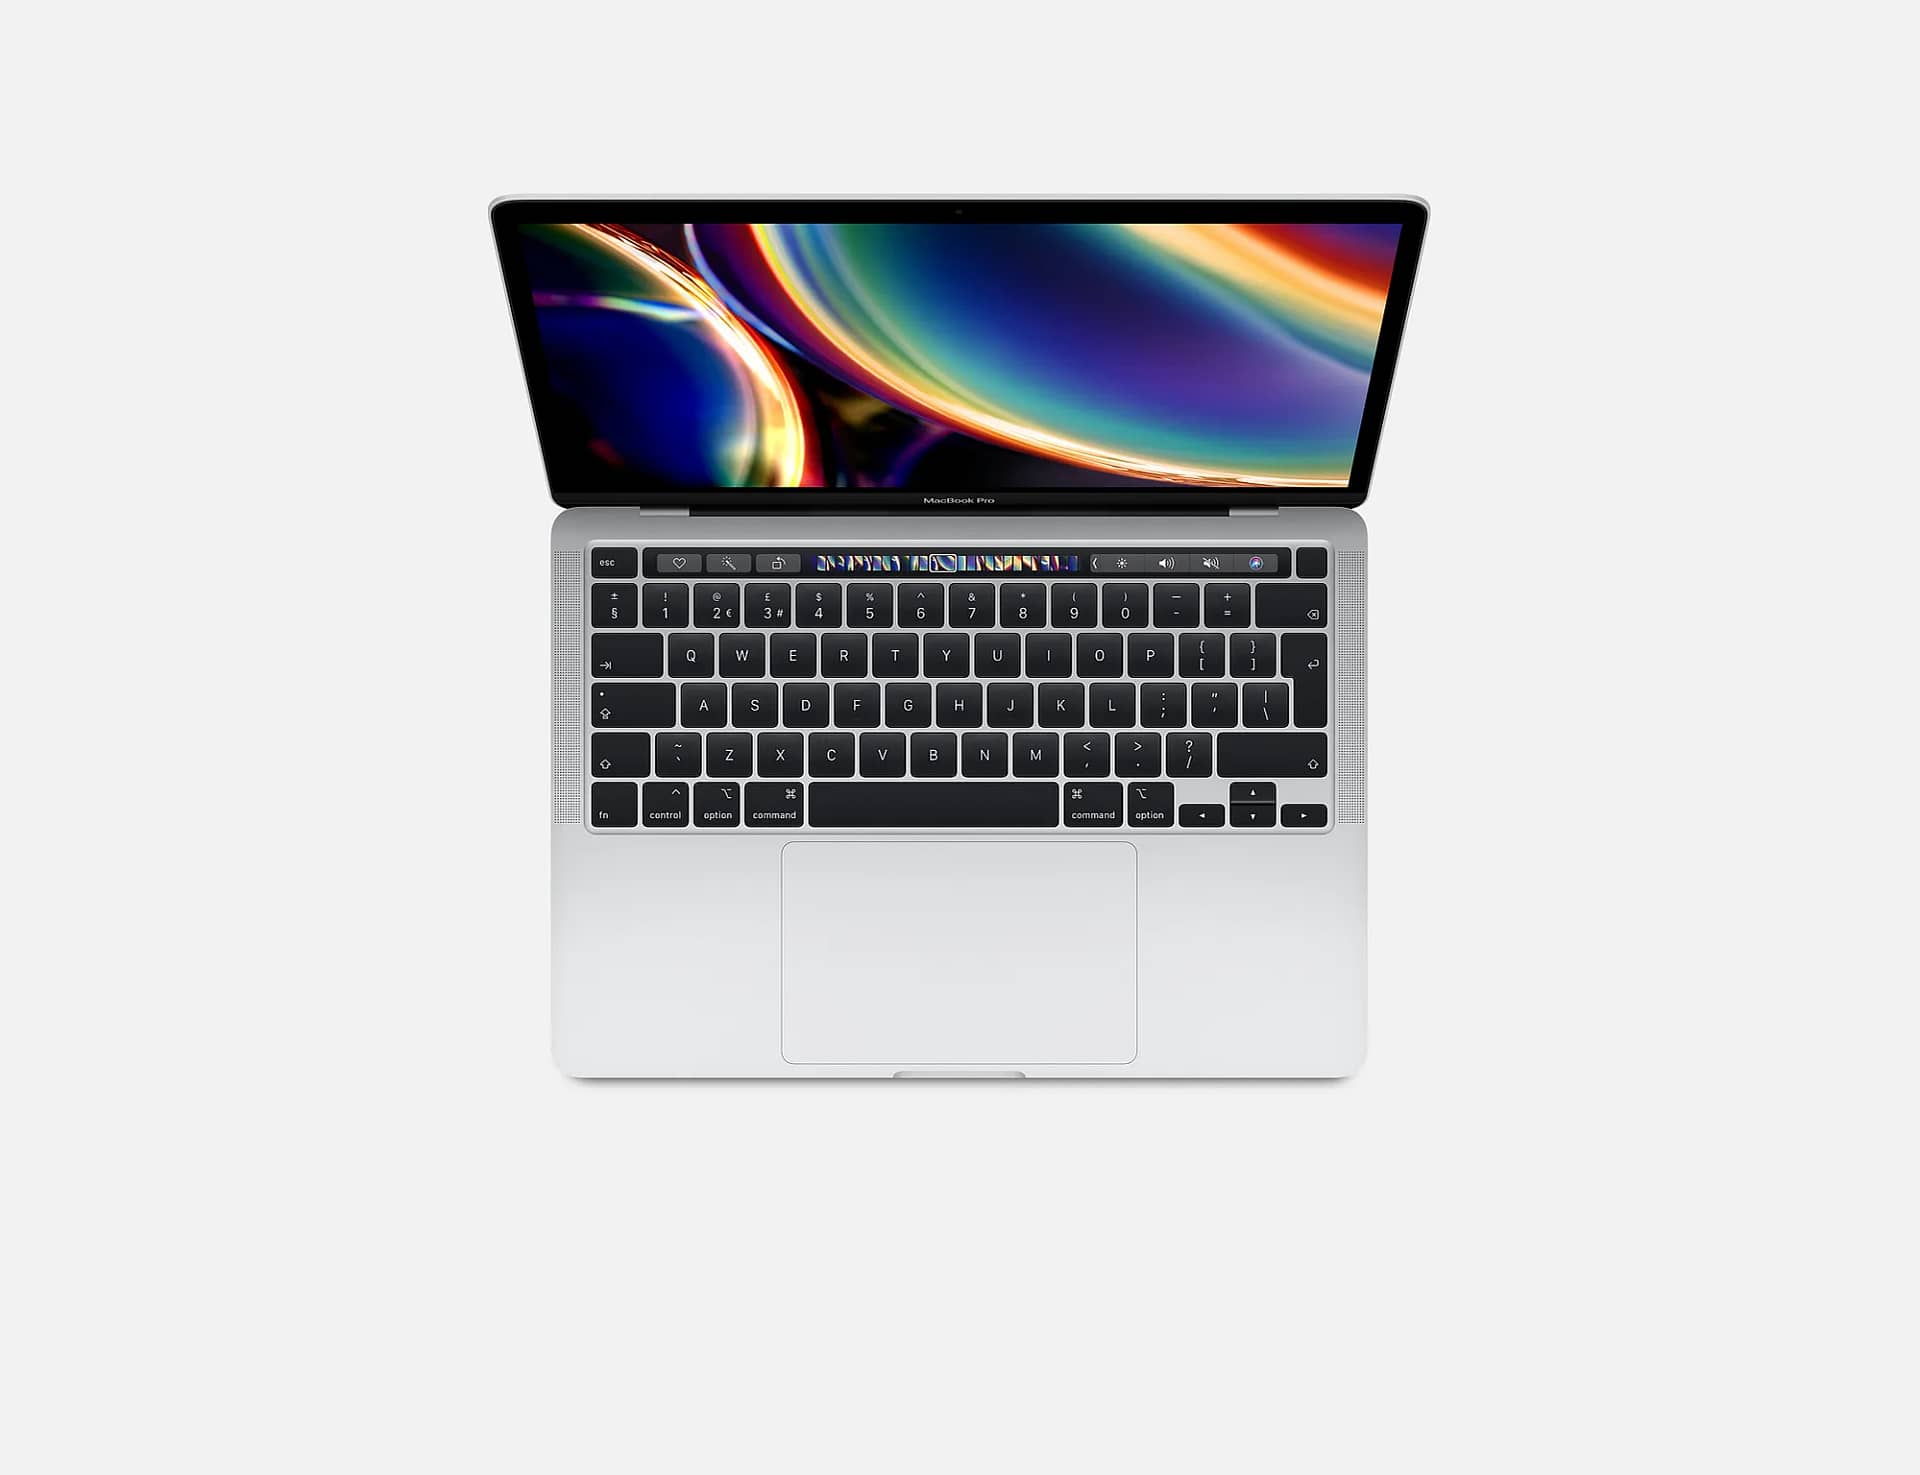 MacBook Pro 13 inch 2016 Two Thunderbolt 3 ports Technical Specifications